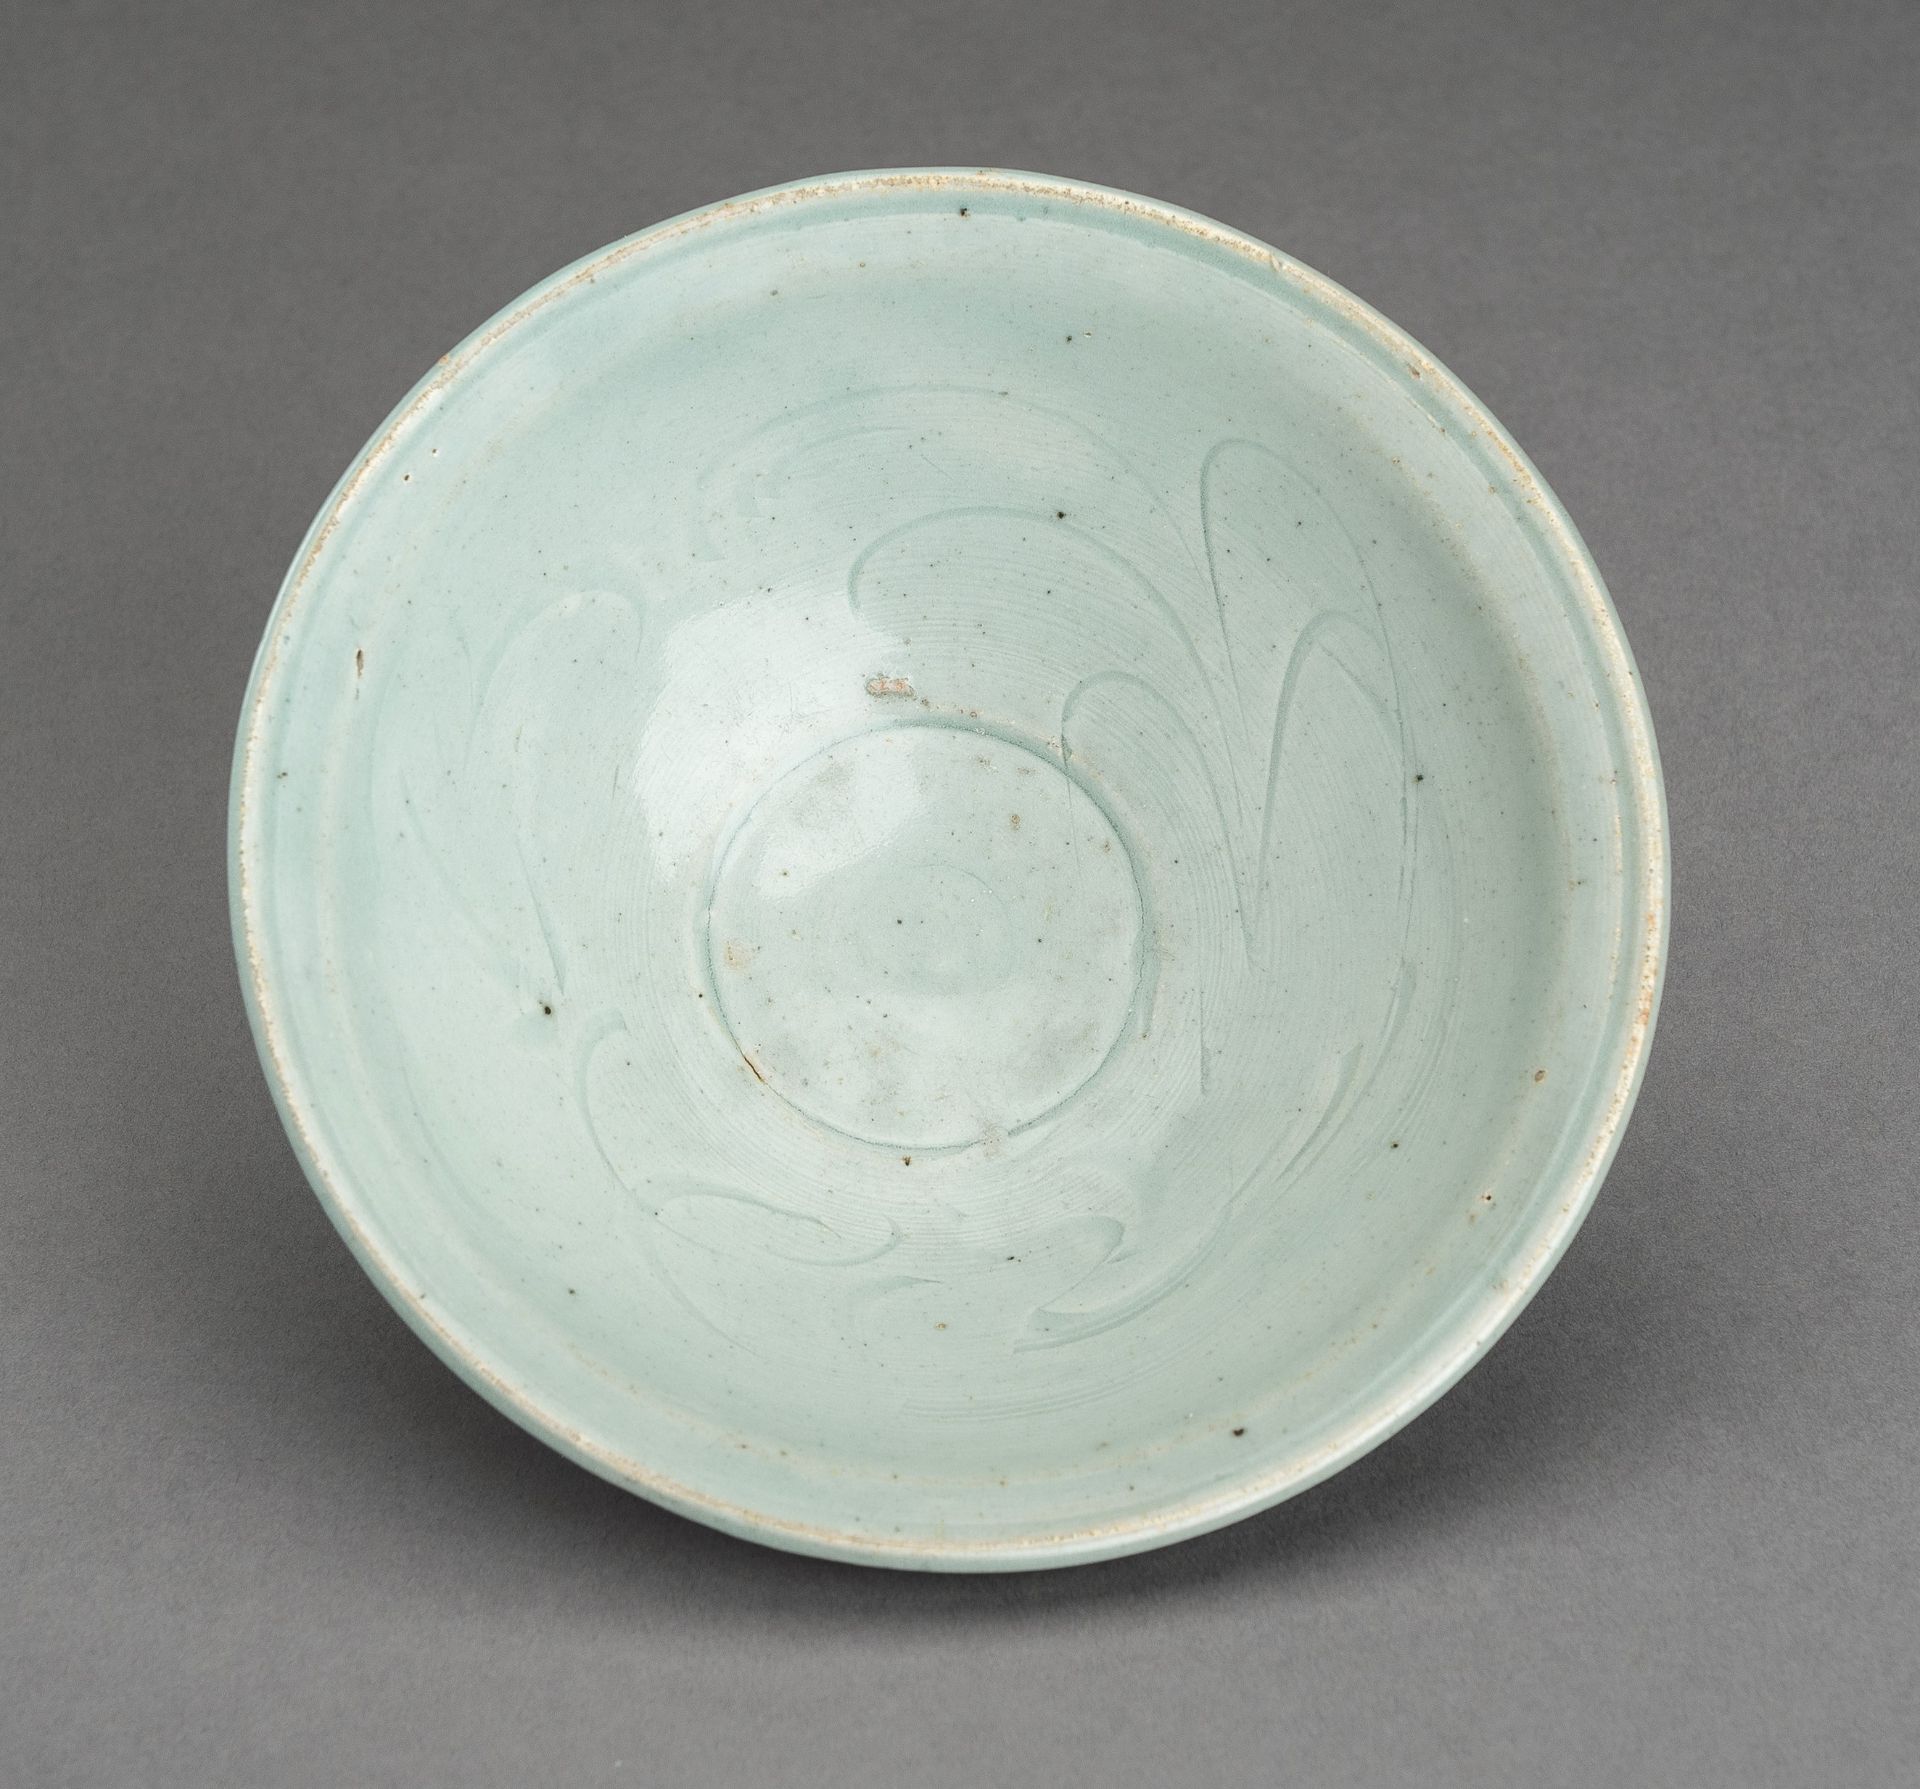 A QINGBAI GLAZED PORCELAIN BOWL WITH INCISED DECORATION